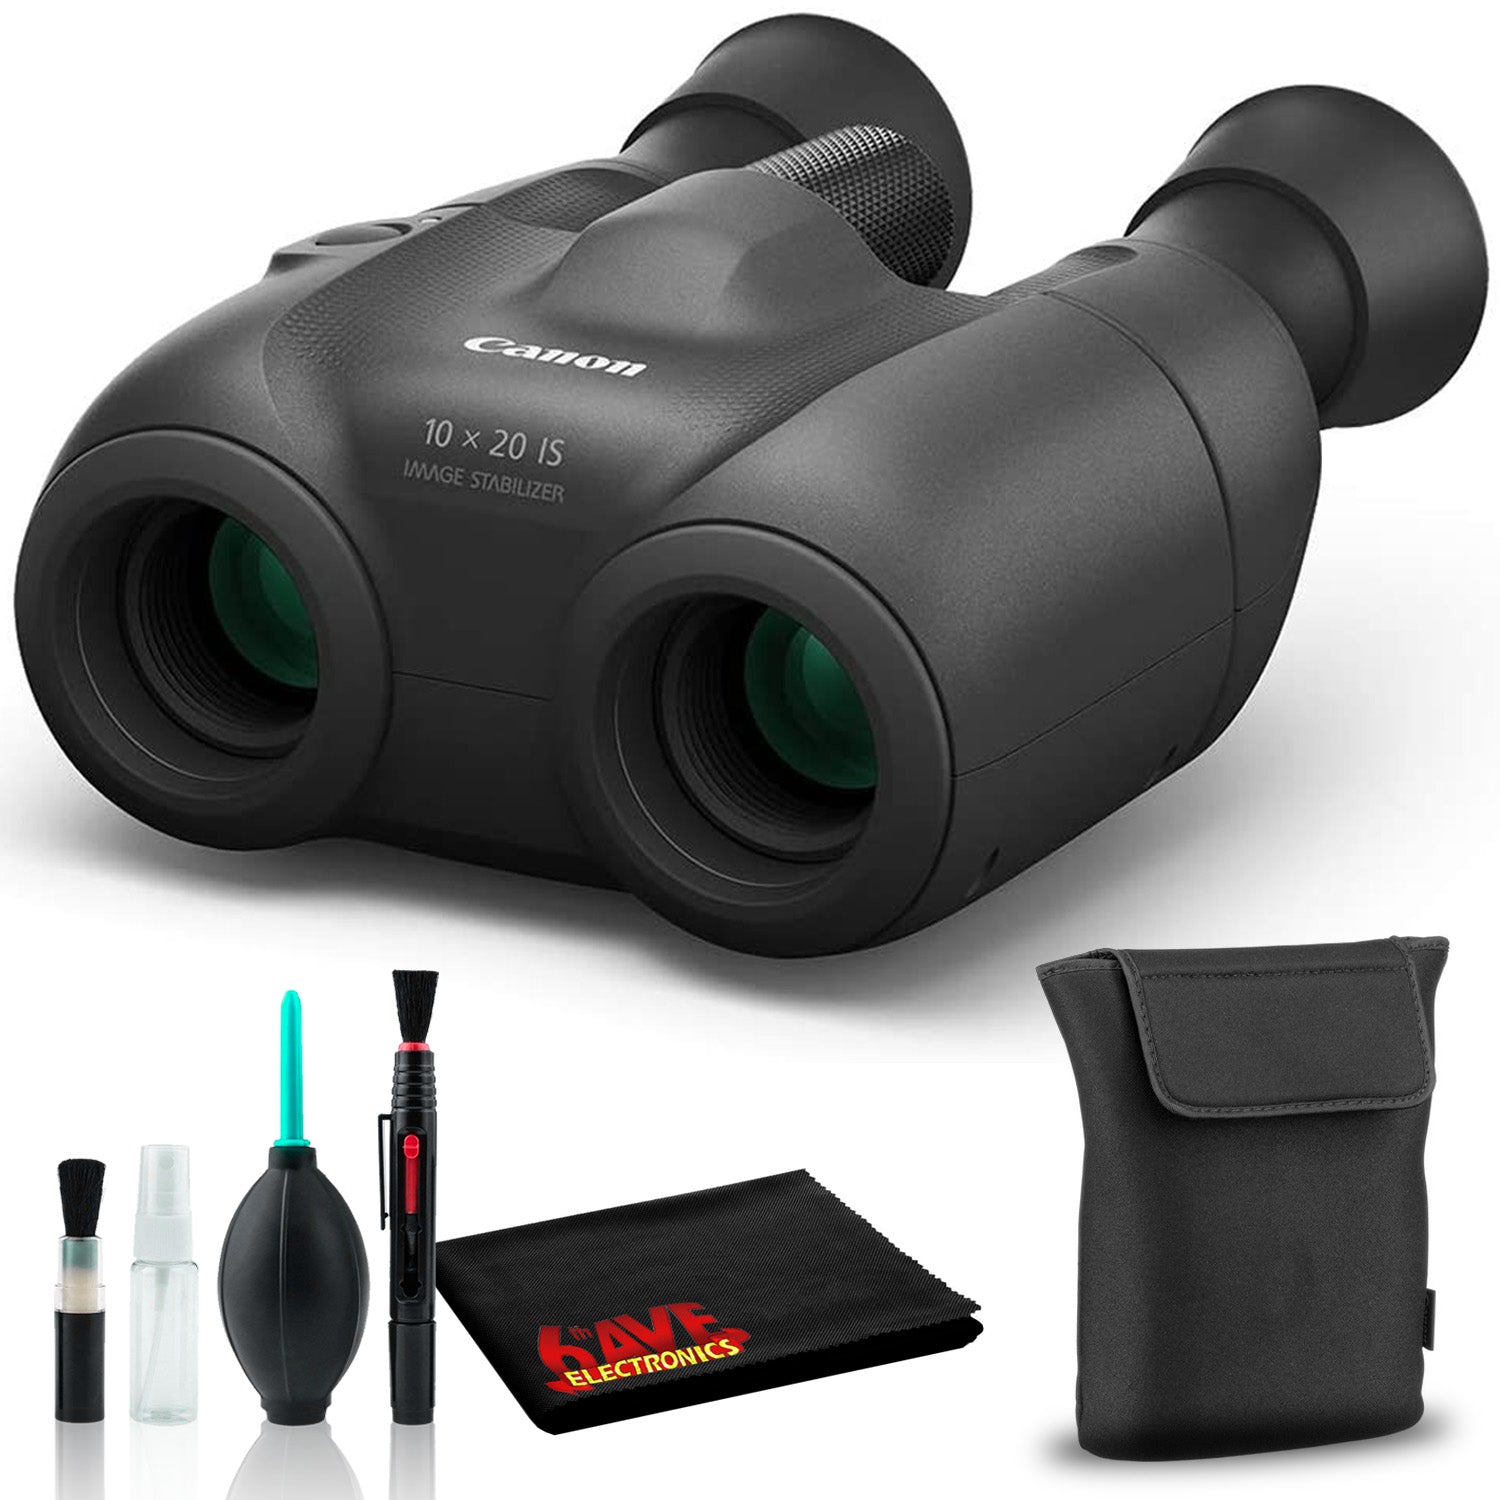 Canon 10x20 IS Image Stabilized Binocular Bundle with Cleaning Kit